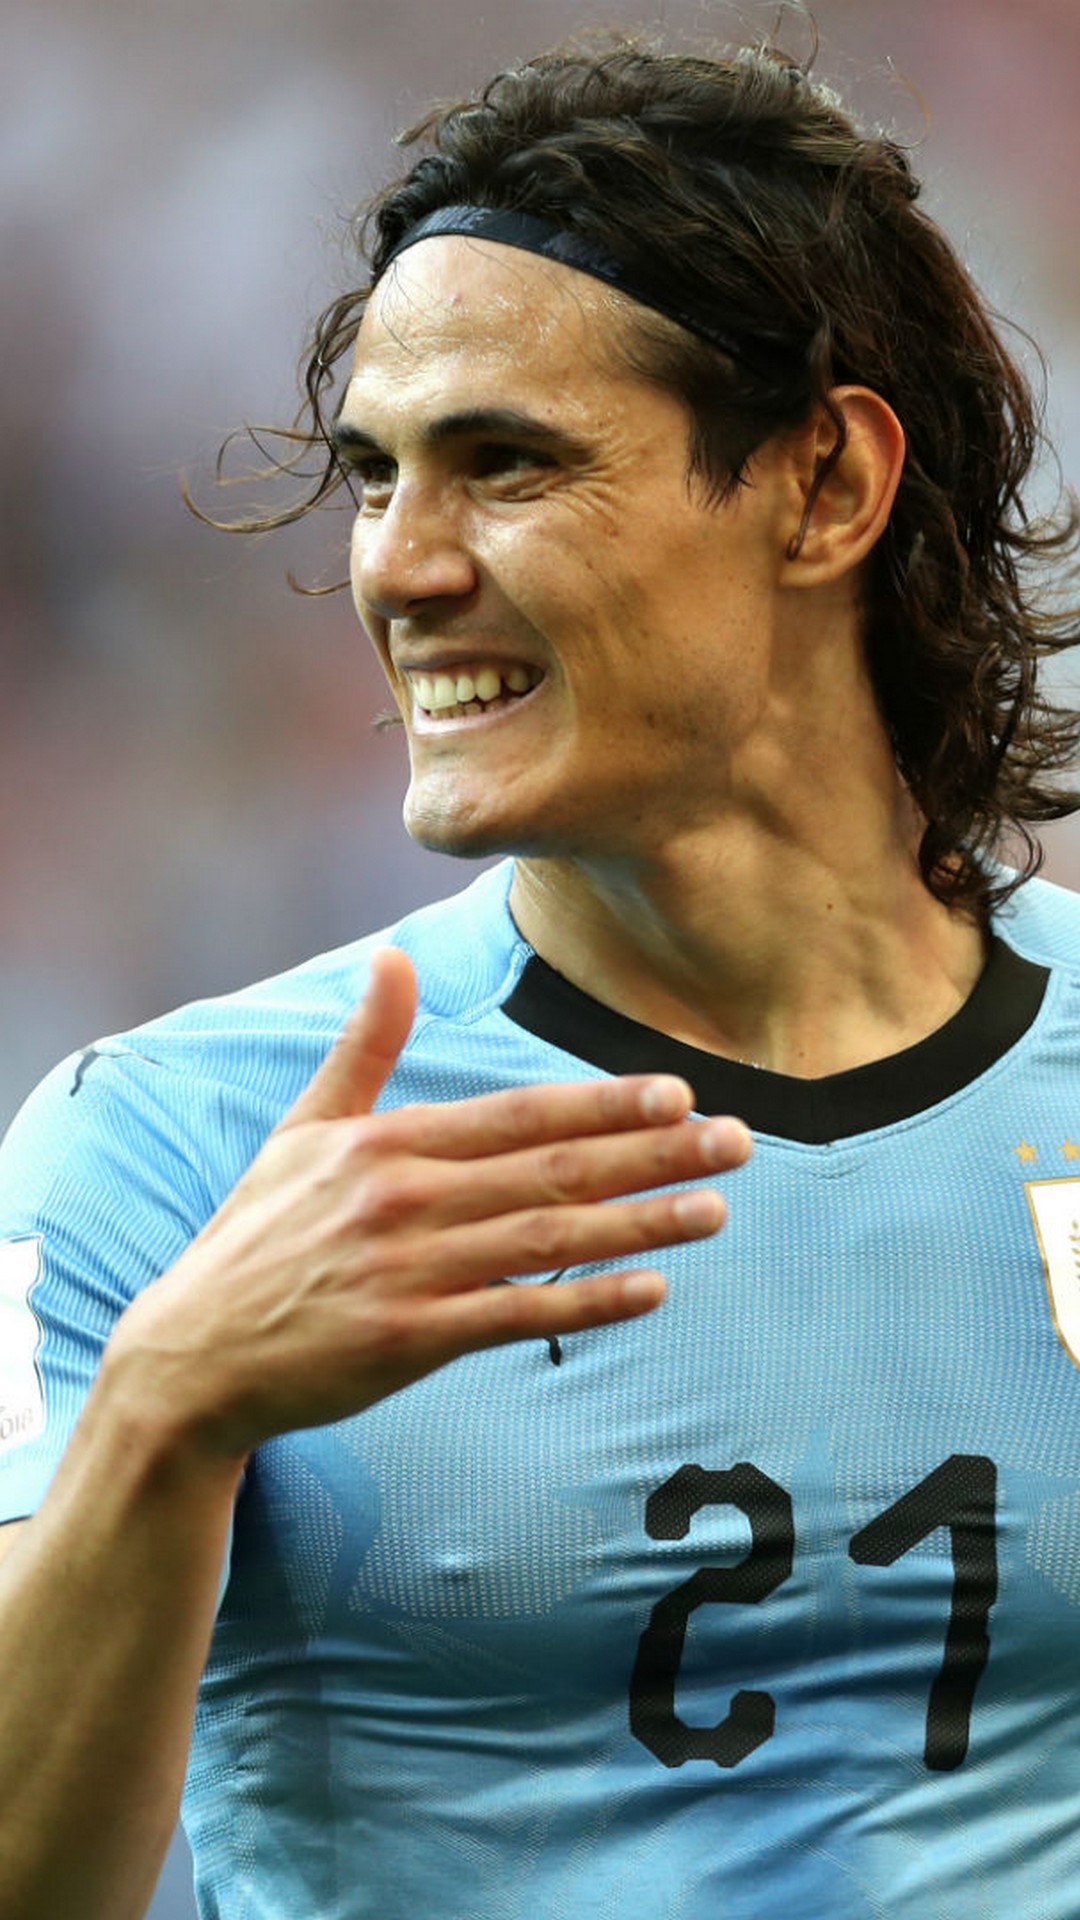 Edinson Cavani Uruguay iPhone Wallpaper with resolution 1080X1920 pixel. You can make this wallpaper for your iPhone 5, 6, 7, 8, X backgrounds, Mobile Screensaver, or iPad Lock Screen